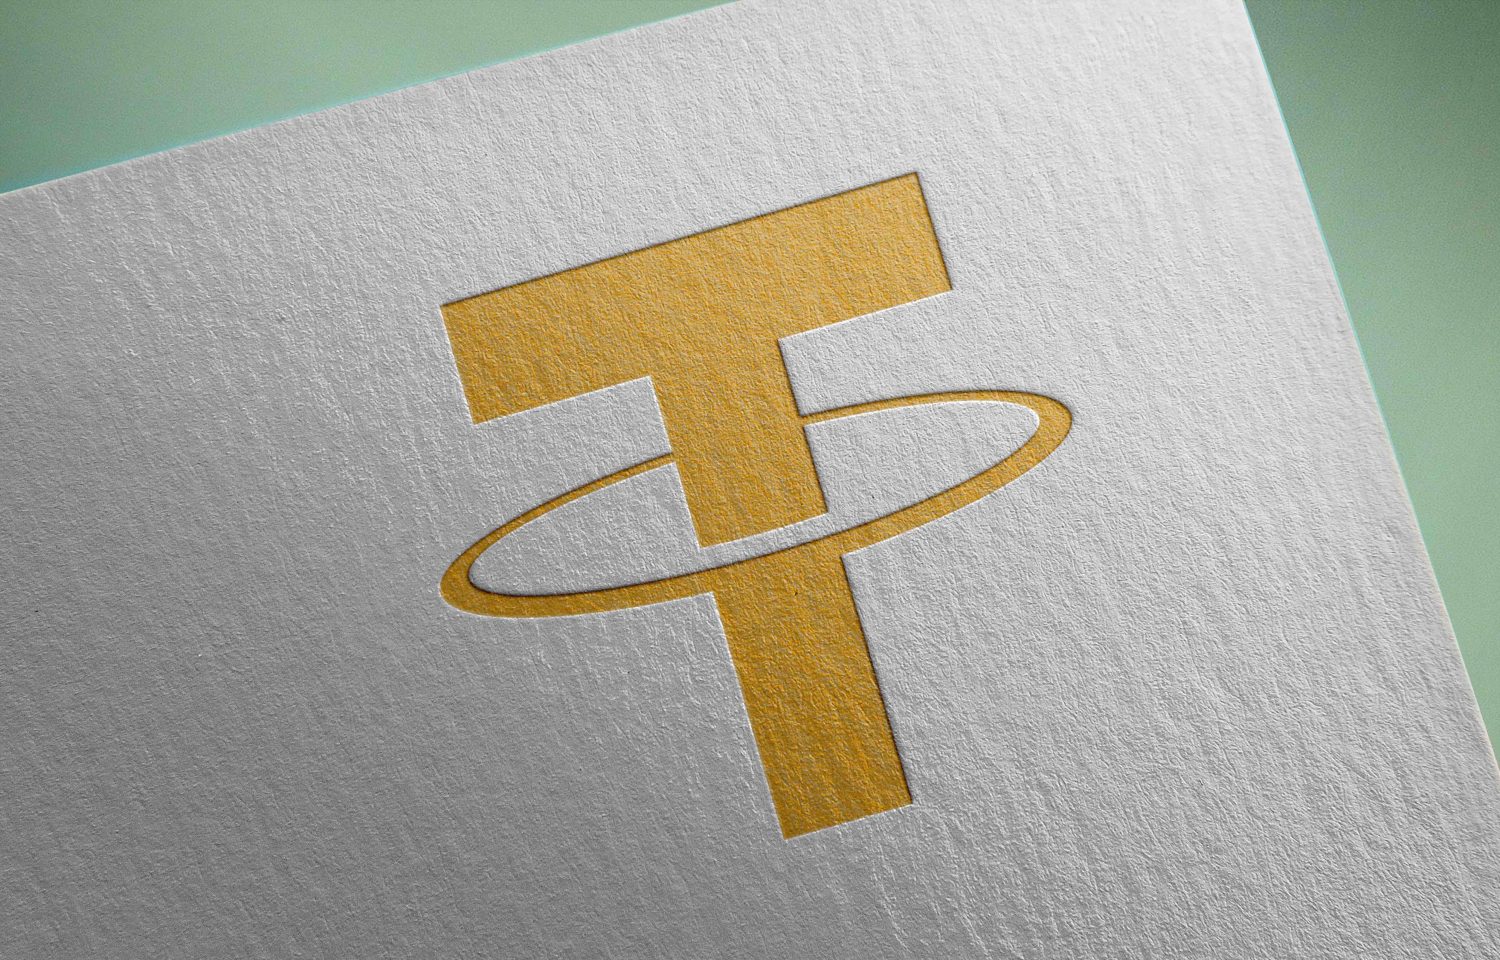 Tether Says Its Stablecoin Is ‘Fully Backed’ Again